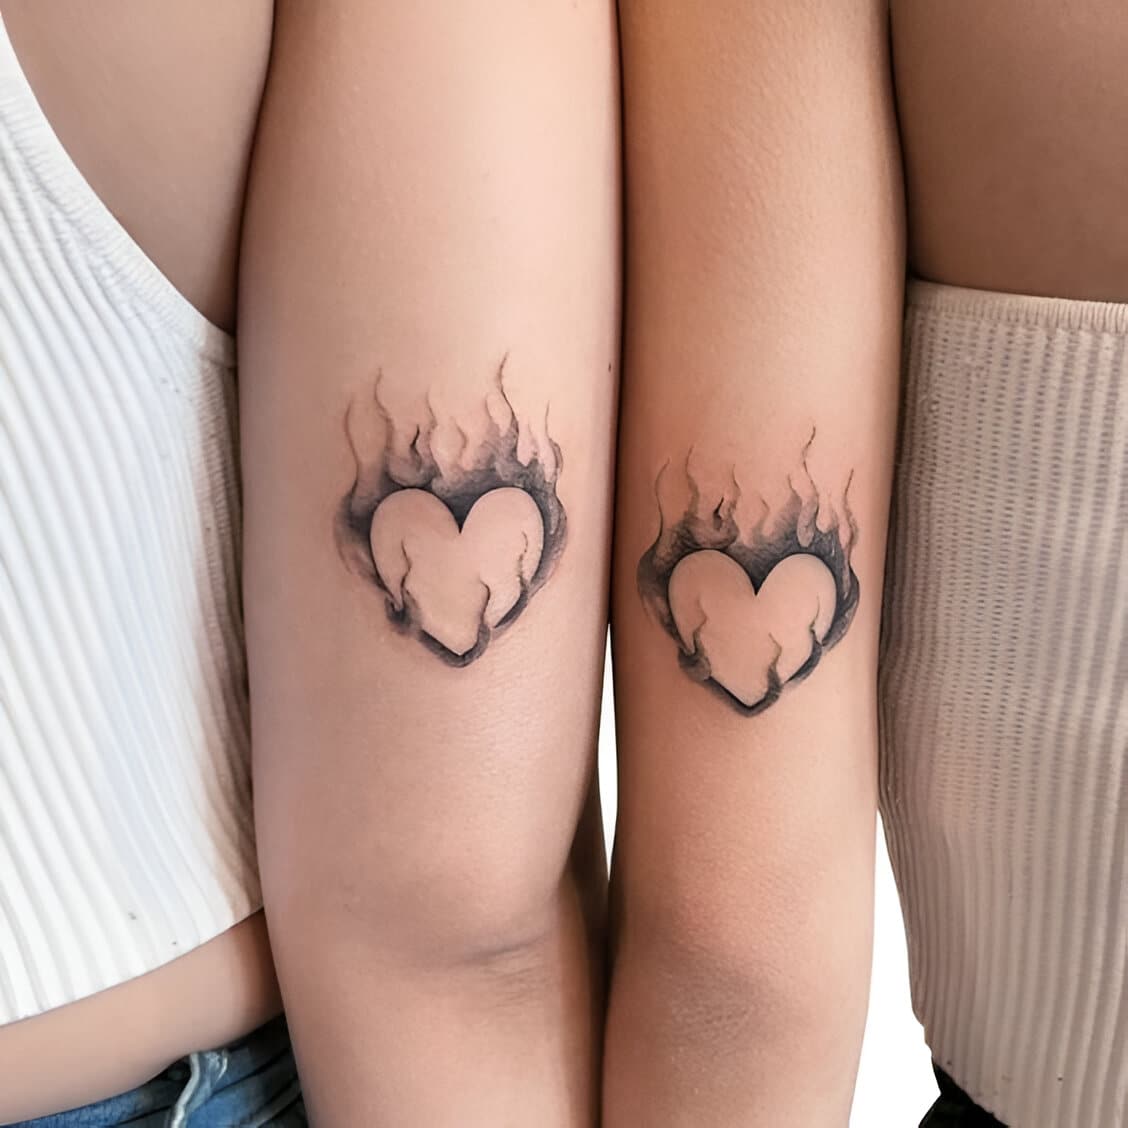 30 Elegant Matching Heart Tattoos To Get With Your Partner ASAP